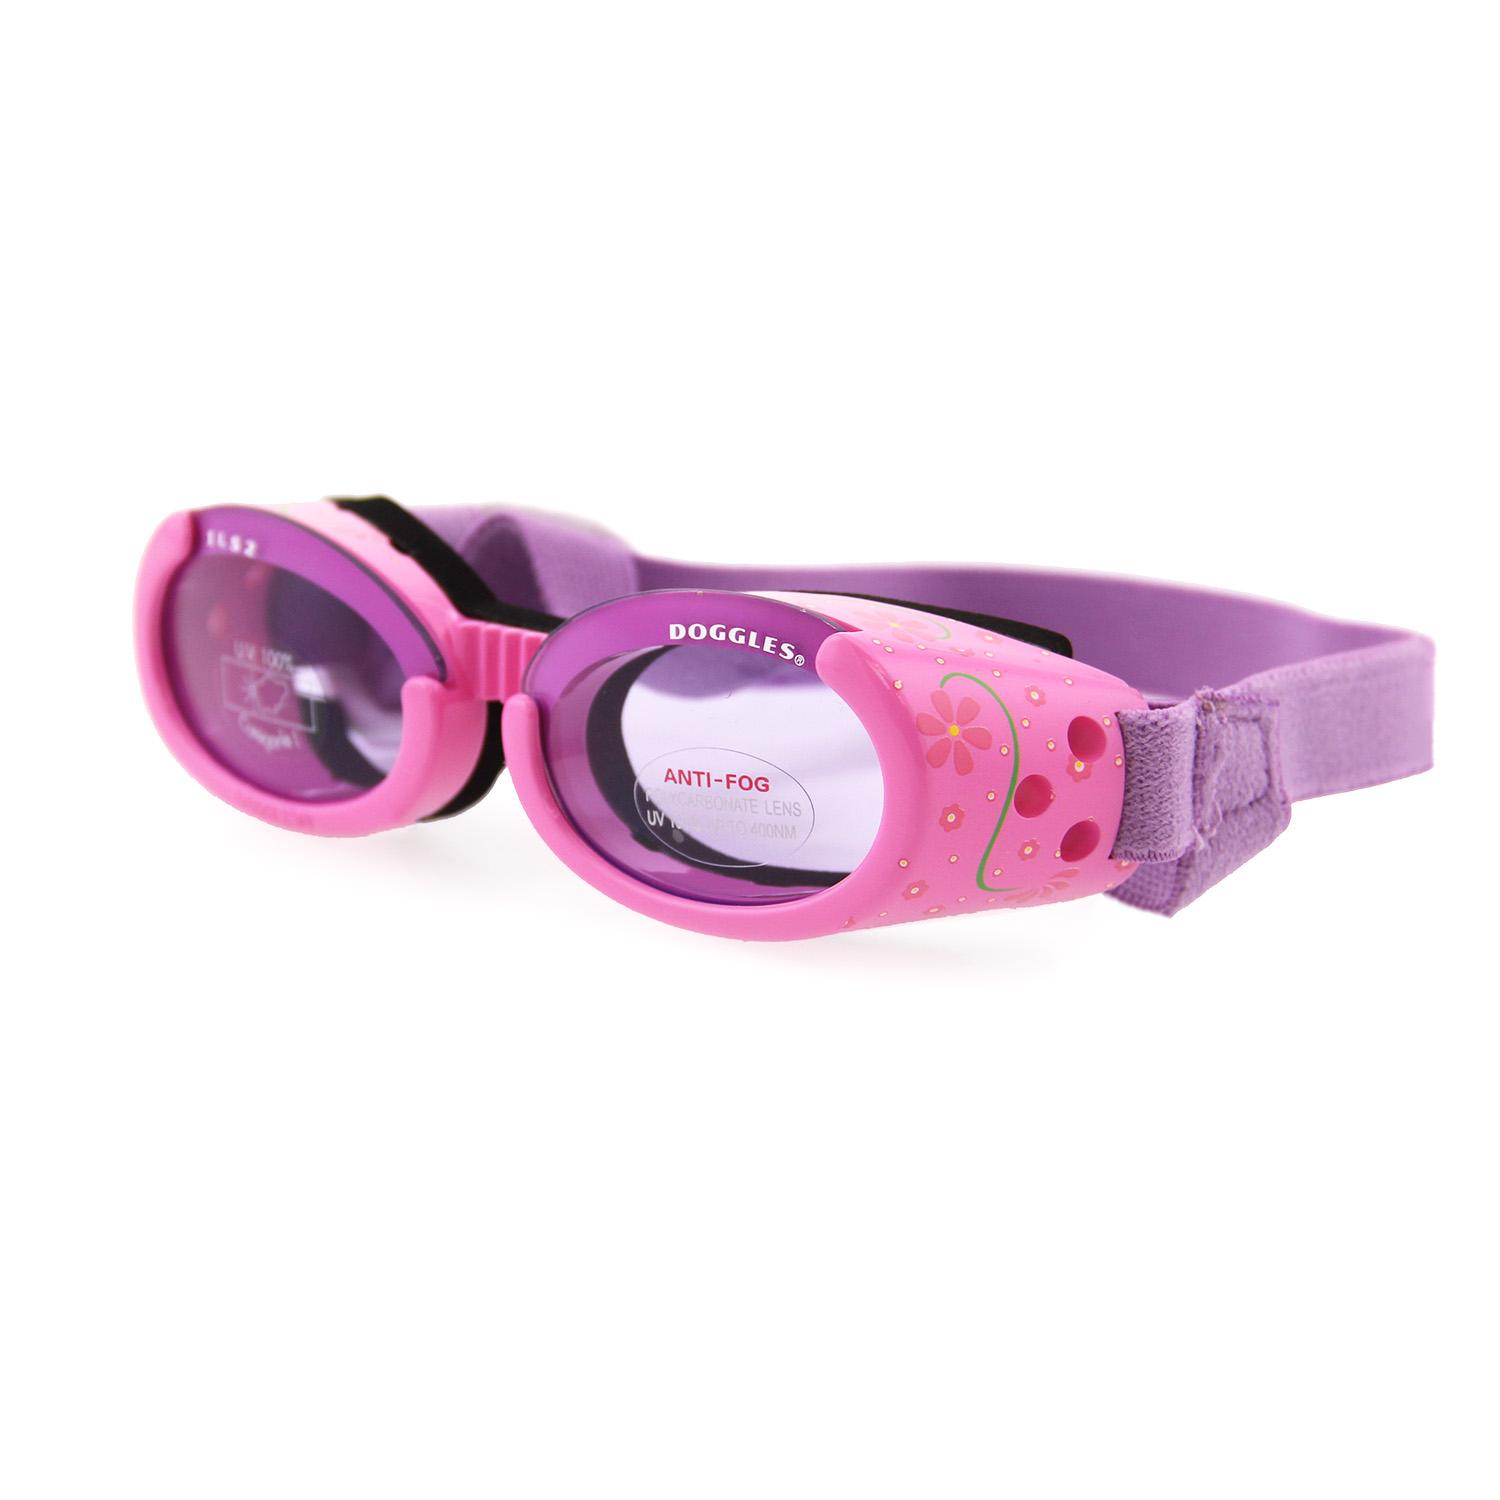 Doggles - ILS2 Pink Frame with Flowers Lilac Lens